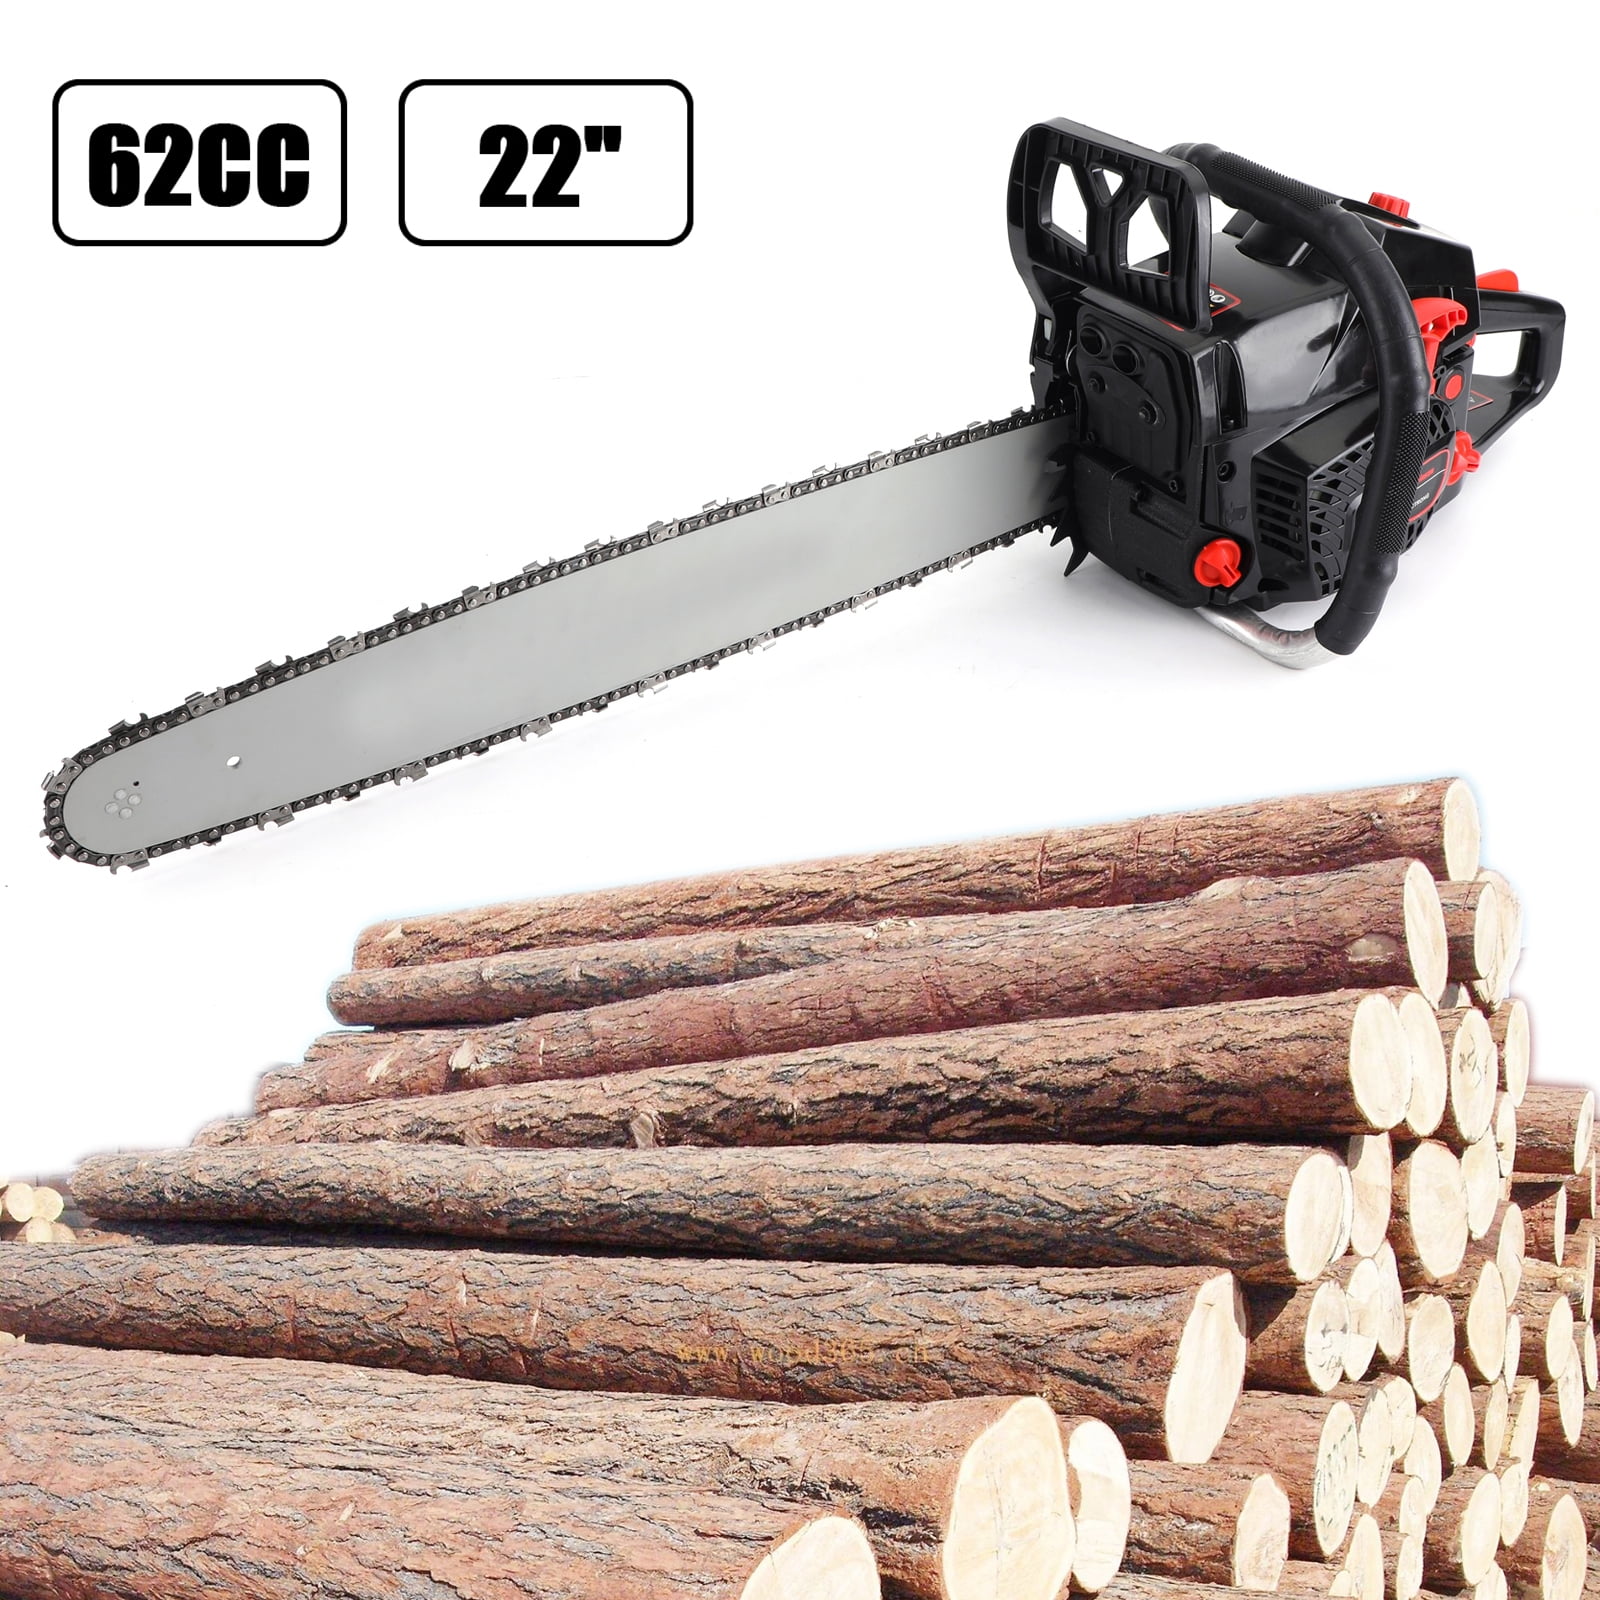 Details about   COOCHEER 62CC 20 Gas Chainsaw Handed Petrol Chain Woodcutting 2 Cycle 4HP B 177 